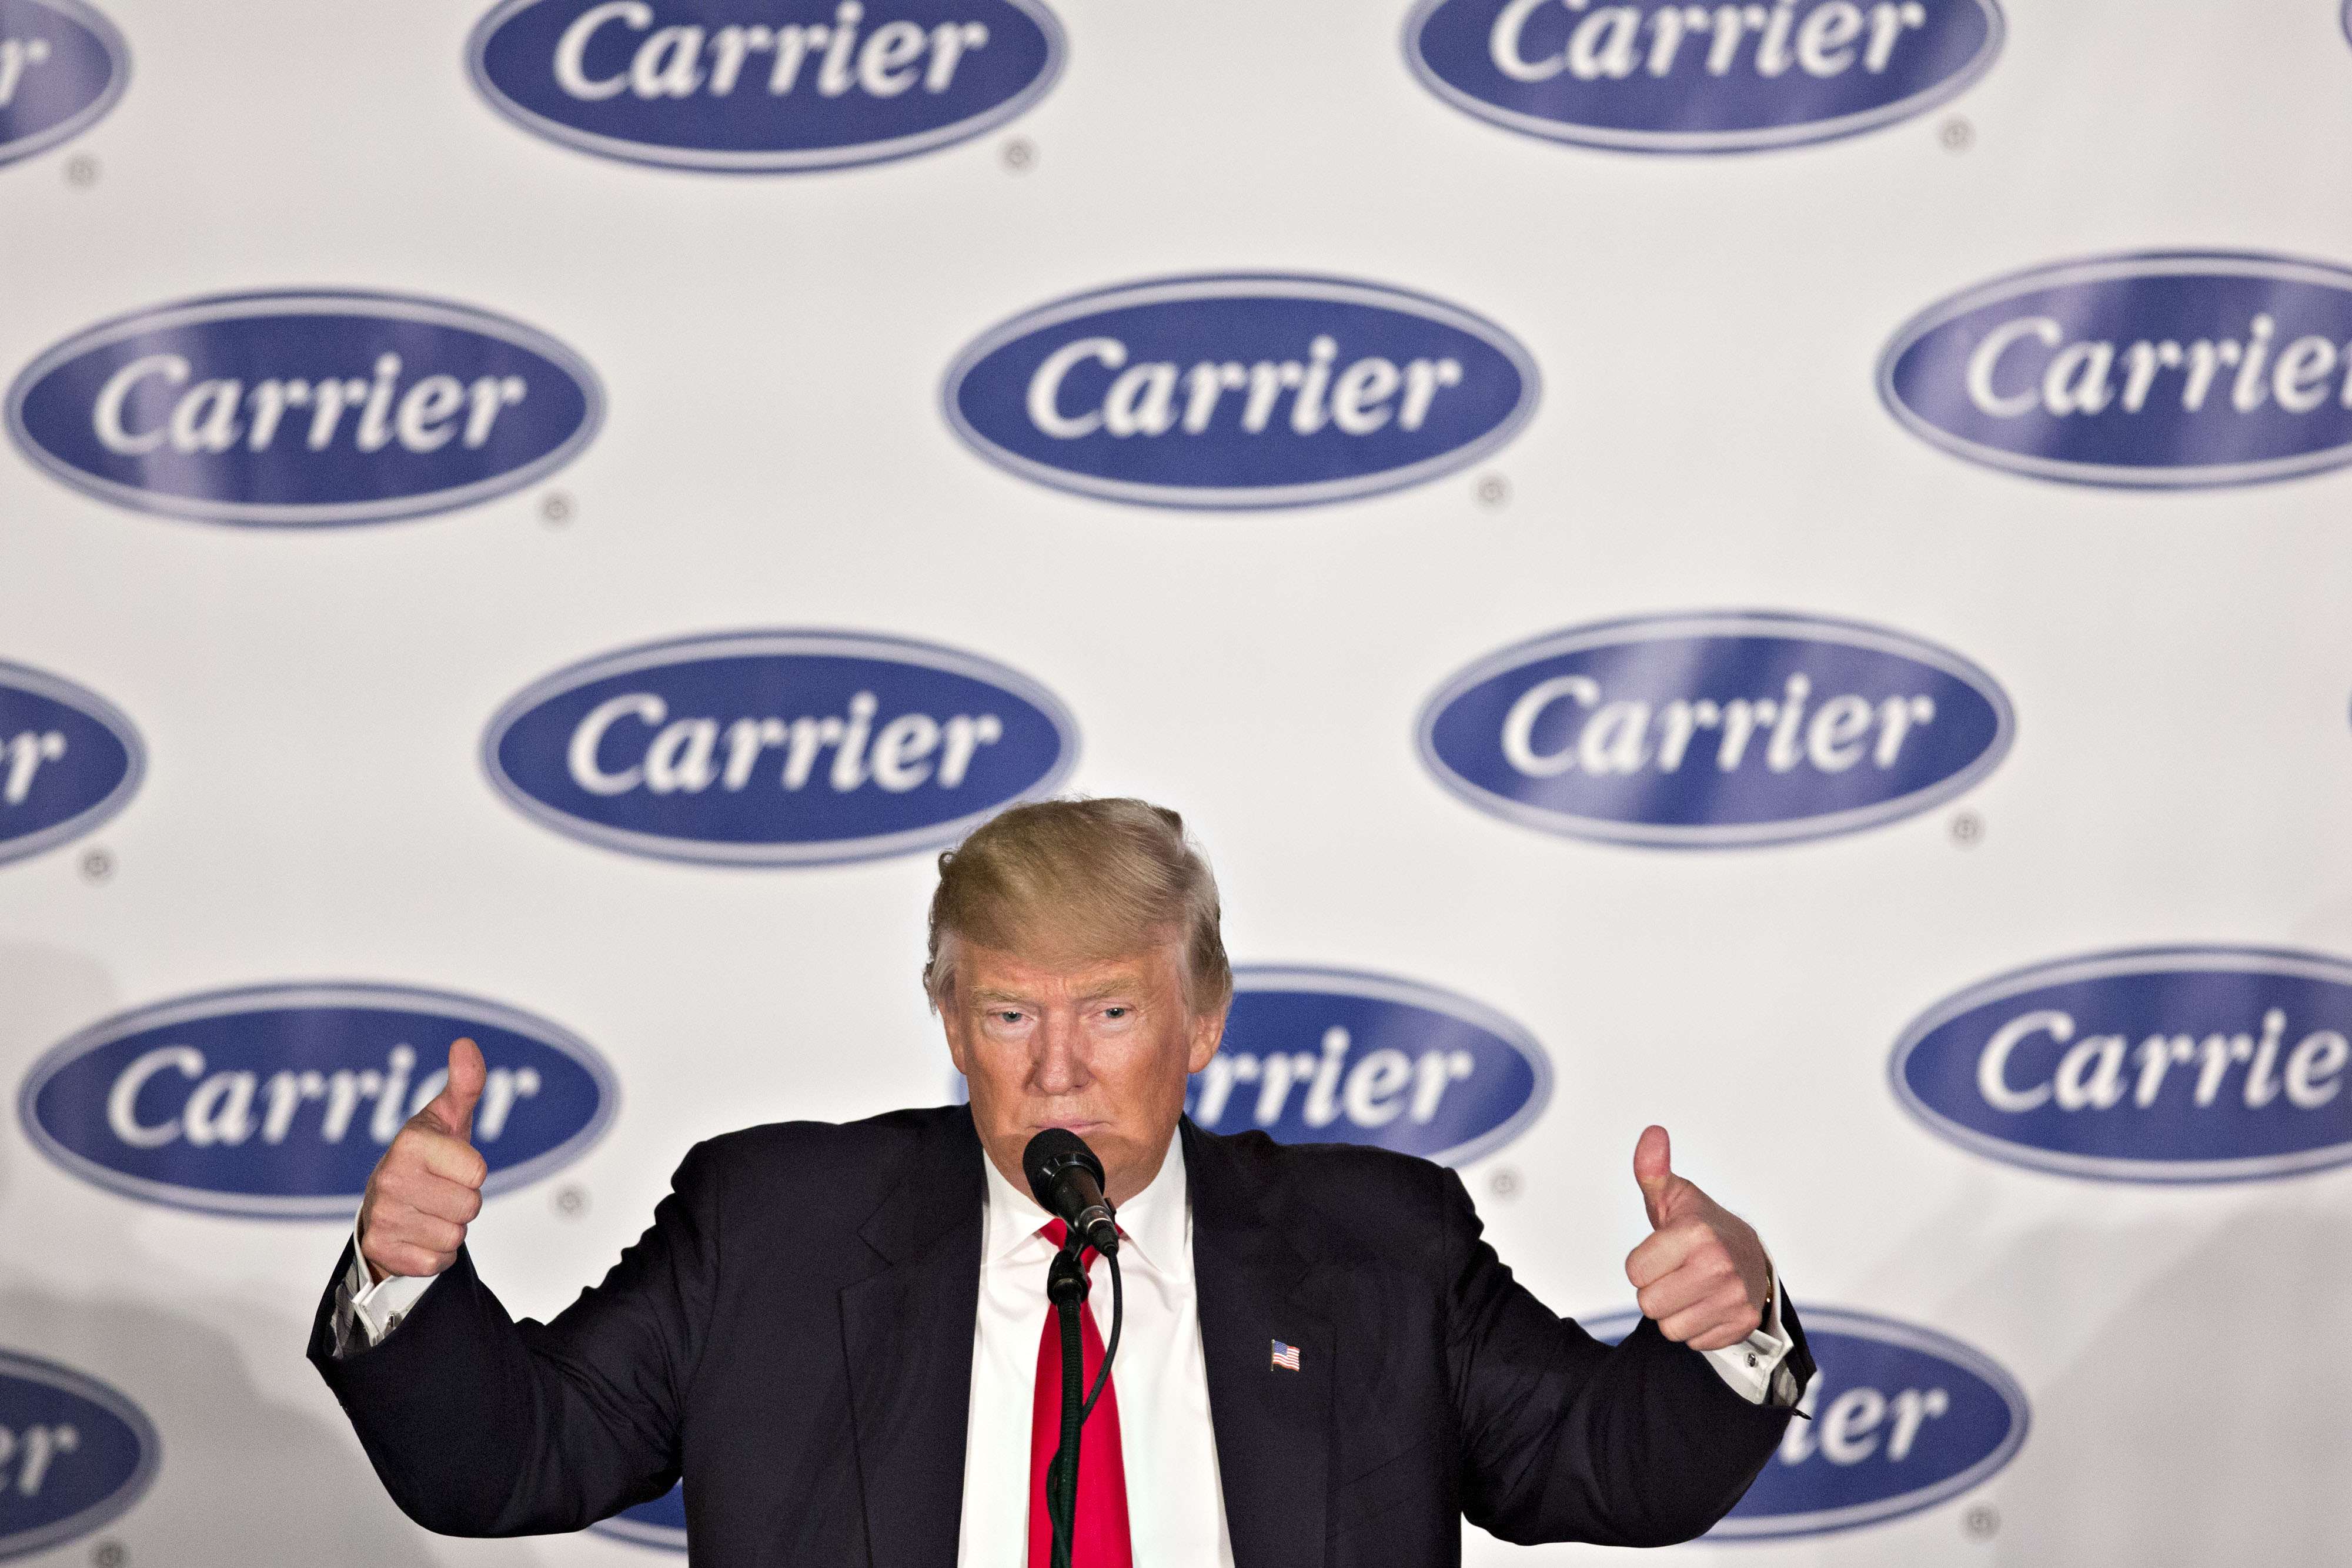 US President-elect Donald Trump speaks at Carrier Corp in Indianapolis, Indiana, on December 1. Trump worked out a deal to keep jobs at the Carrier manufacturing plant from being moved to Mexico, in keeping with his campaign promise to “make America great again”. Photo: Bloomberg